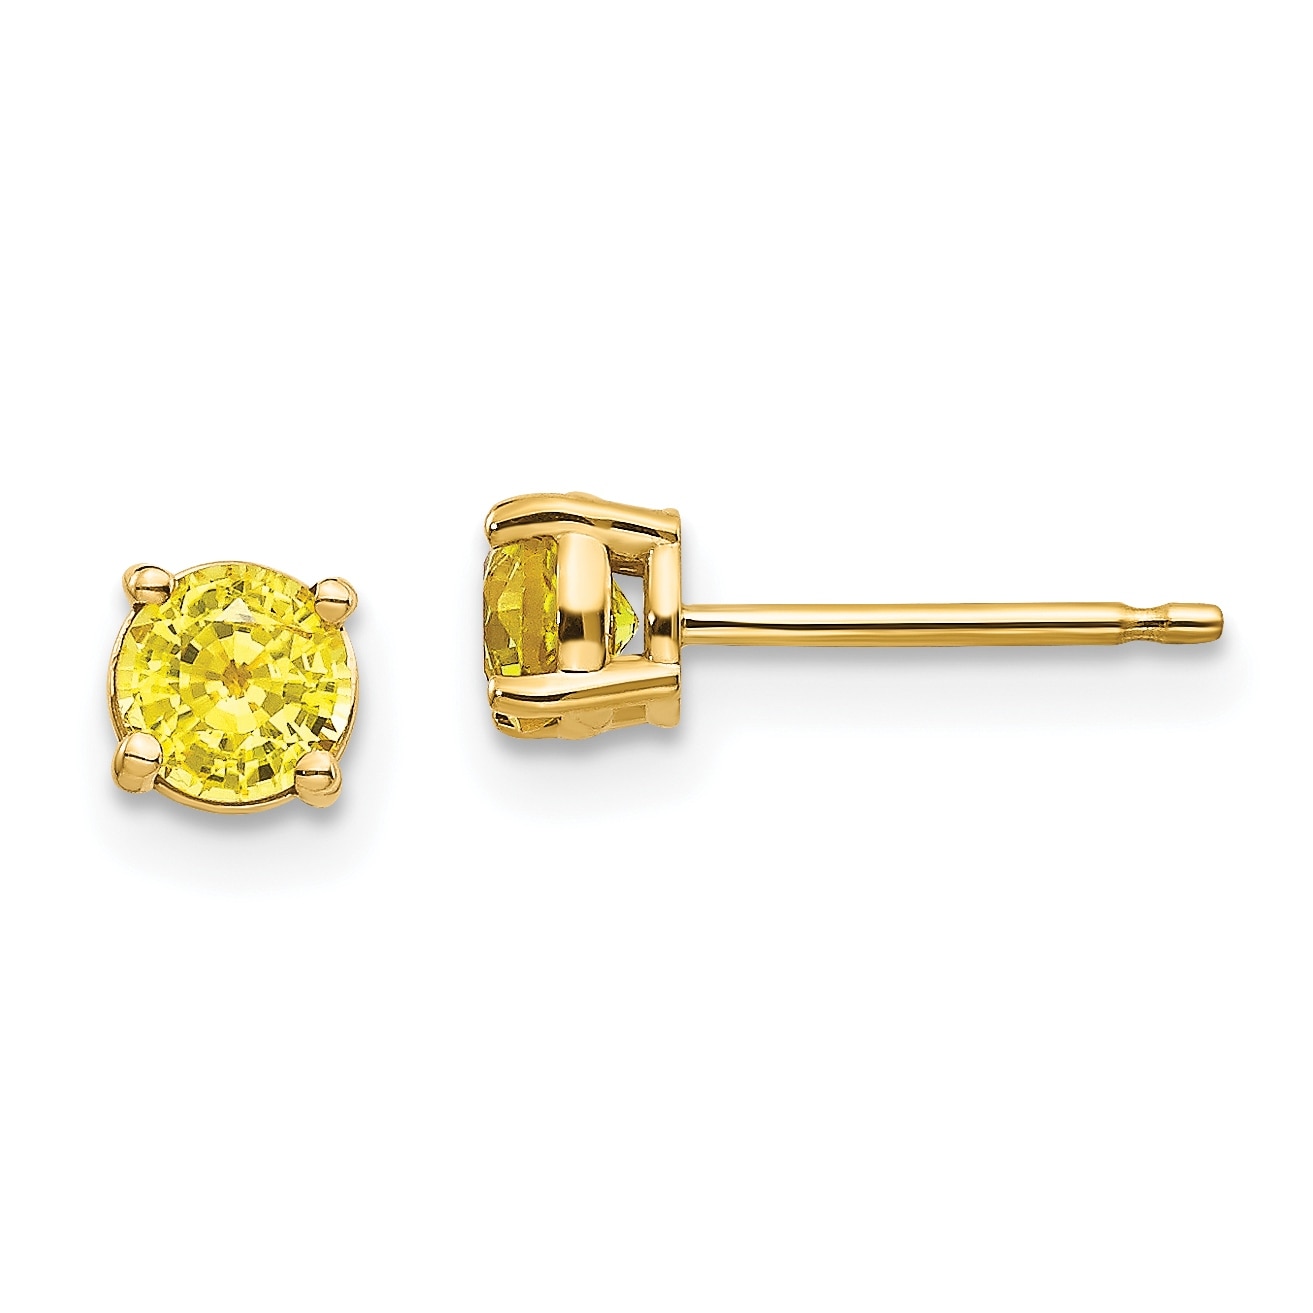 4.8 TCW Certified Ceylon Yellow Sapphire Stud Earrings White Gold over Sterling 